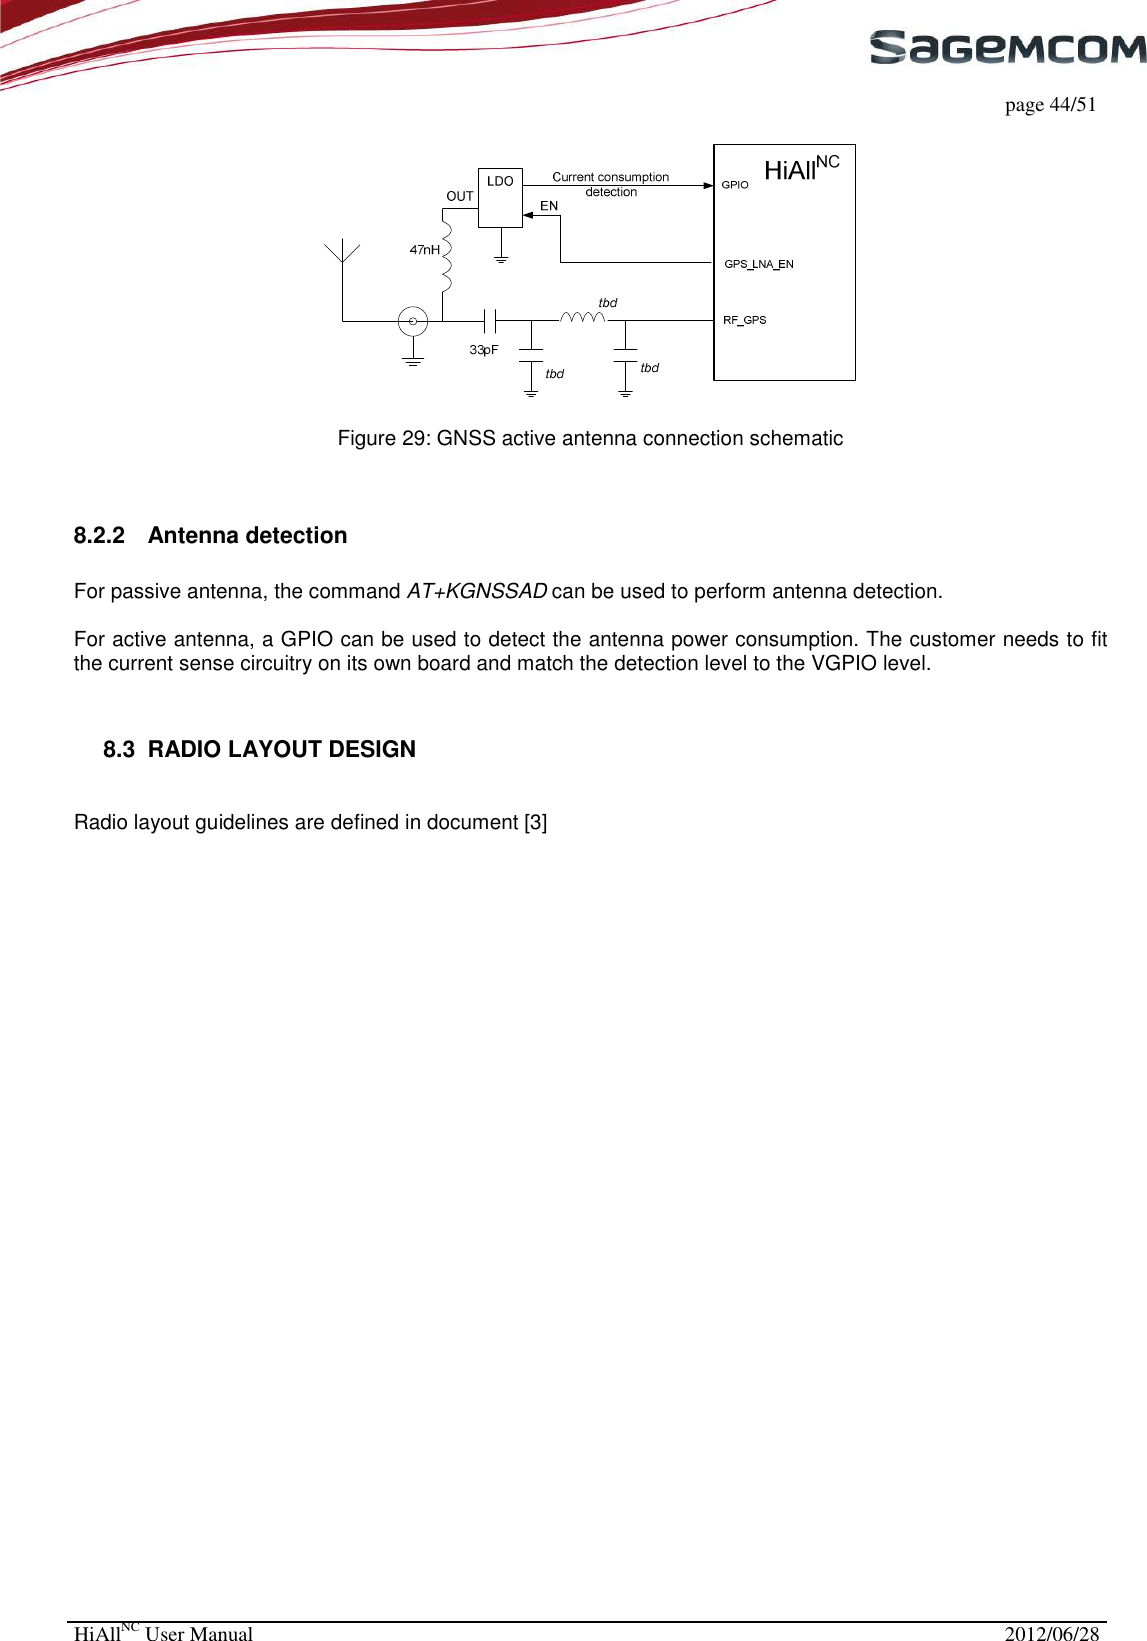     page 44/51 HiAllNC User Manual  2012/06/28     Figure 29: GNSS active antenna connection schematic   8.2.2  Antenna detection  For passive antenna, the command AT+KGNSSAD can be used to perform antenna detection.  For active antenna, a GPIO can be used to detect the antenna power consumption. The customer needs to fit the current sense circuitry on its own board and match the detection level to the VGPIO level.  8.3  RADIO LAYOUT DESIGN  Radio layout guidelines are defined in document [3] 